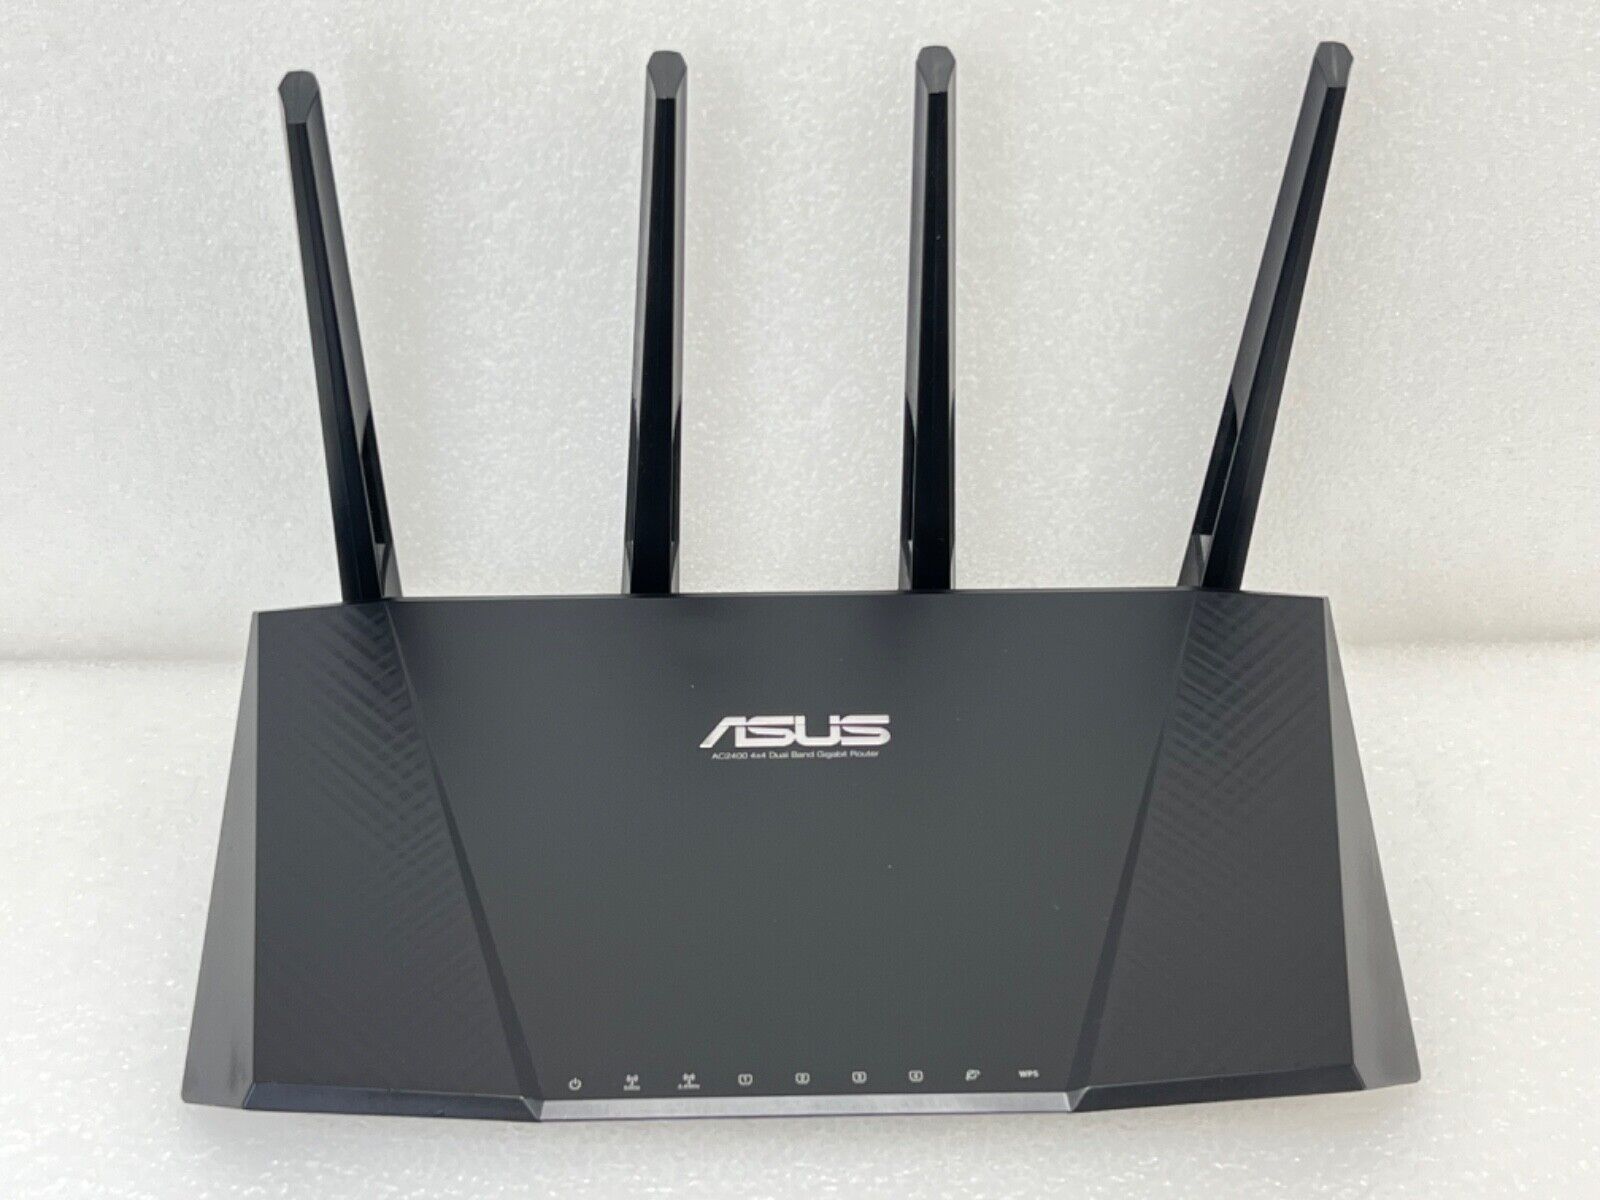 Asus RT-AC87R / AC2400 Dual Band Wireless Dual Band Gigabit Router - Black